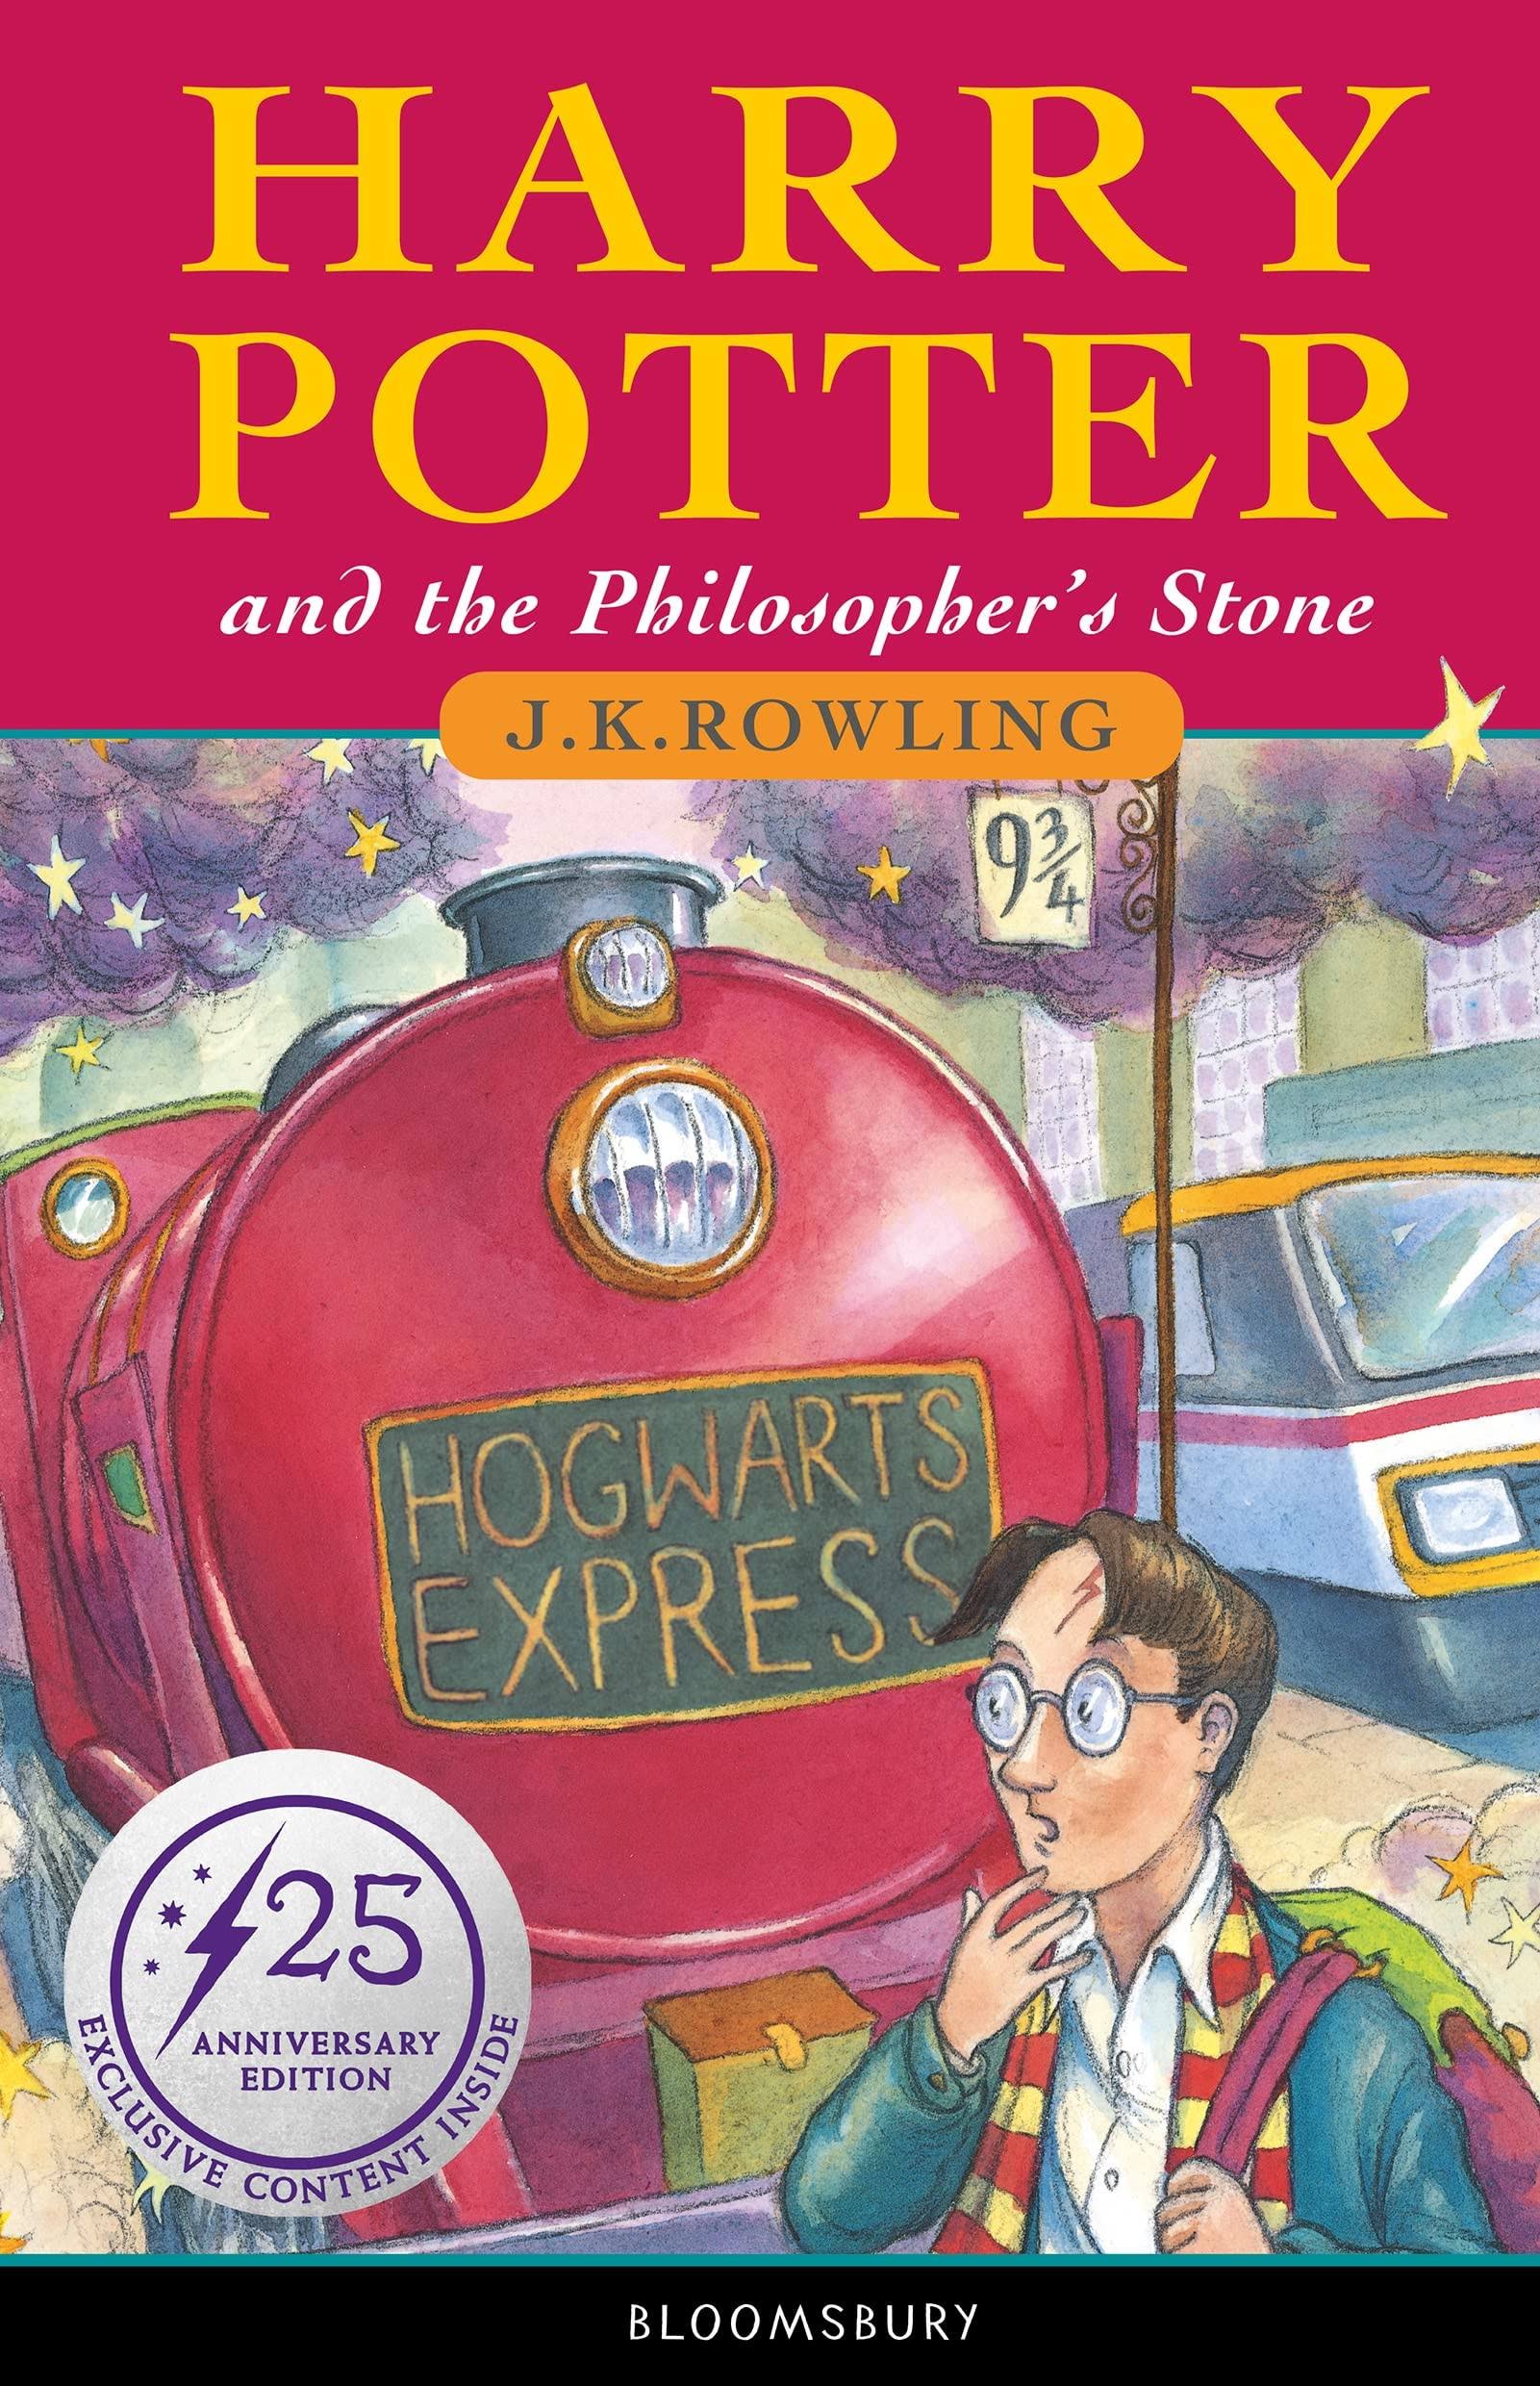 Harry Potter and the Philosopher's Stone - 25th Anniversary Edition [Book]